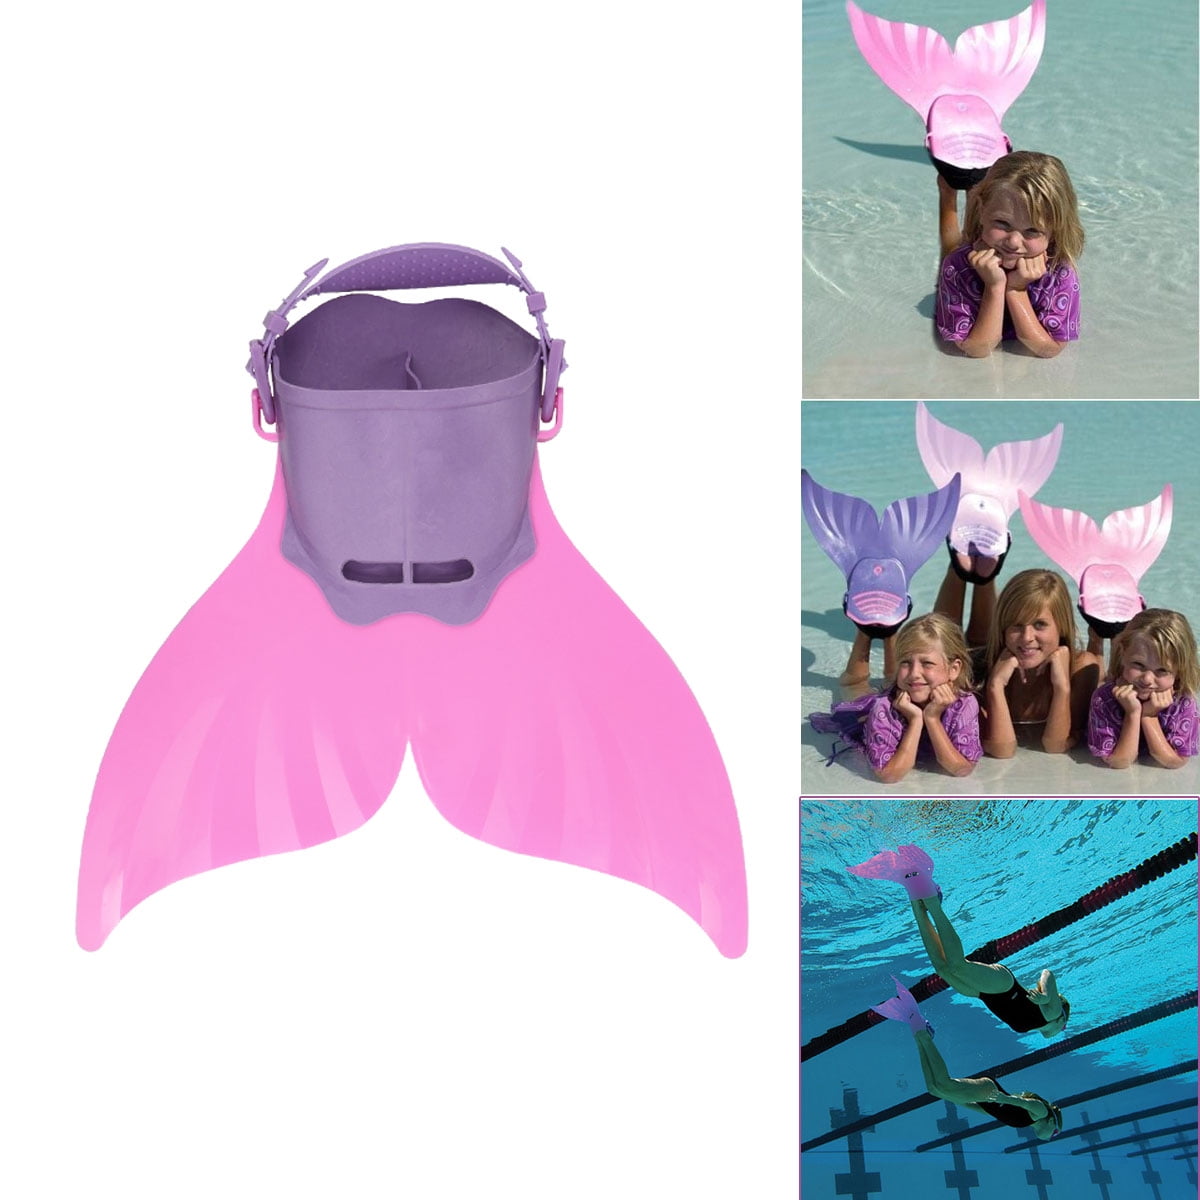 Coaste Mermaid Fins Monofin Swim Fins One-Piece Diving Fins Swimming Fins for Kids/Adult Swimming Training Aid 